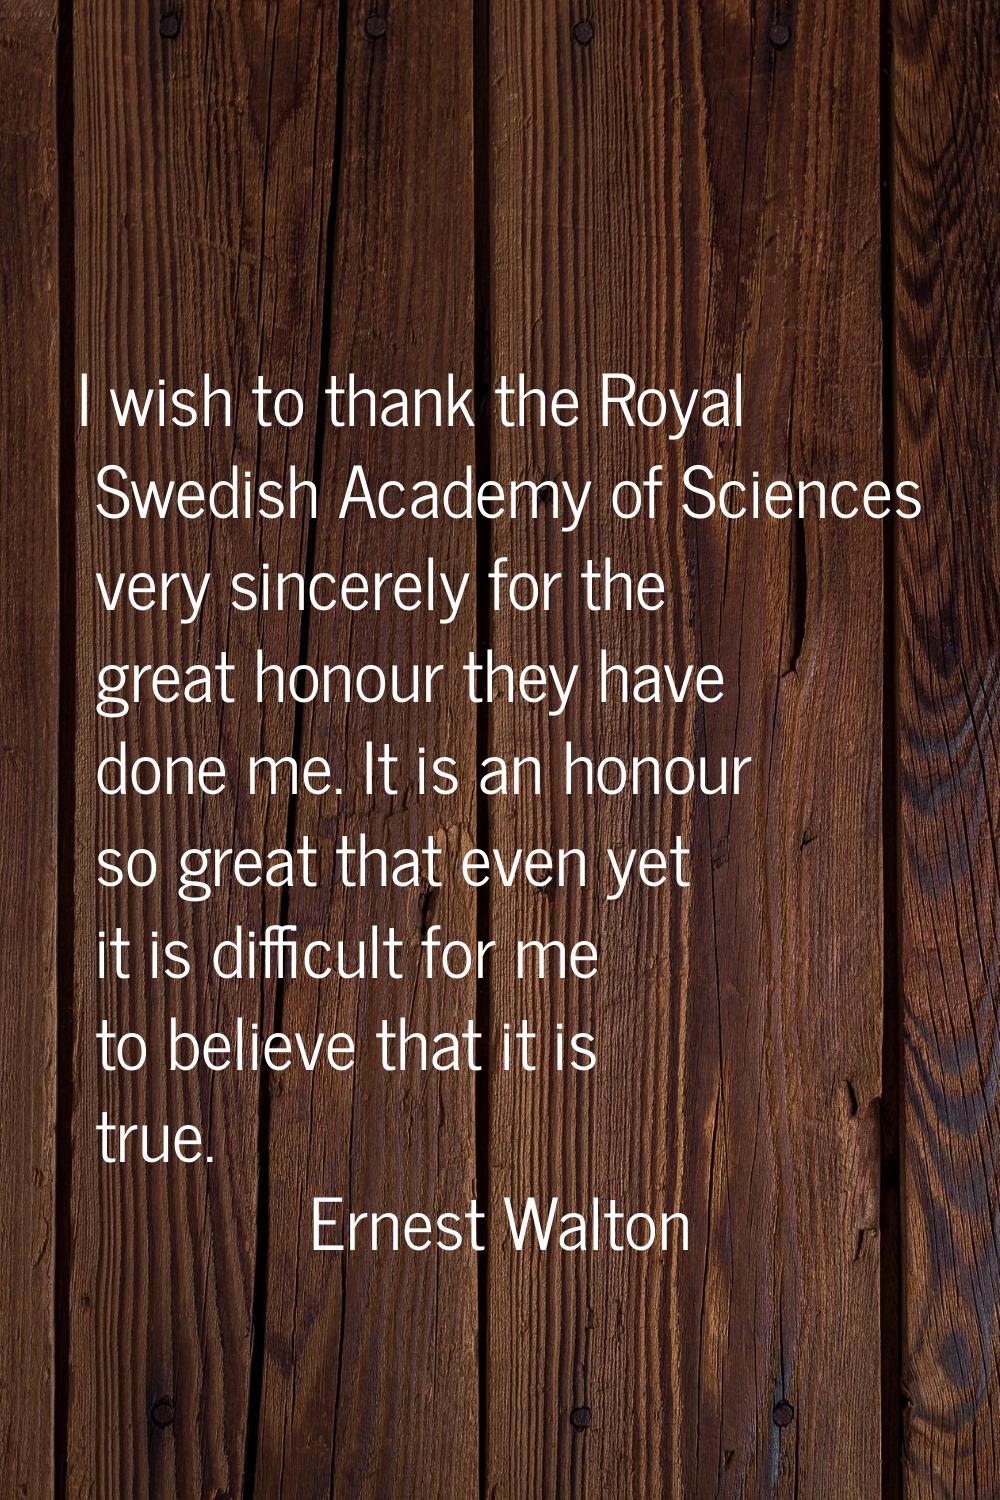 I wish to thank the Royal Swedish Academy of Sciences very sincerely for the great honour they have